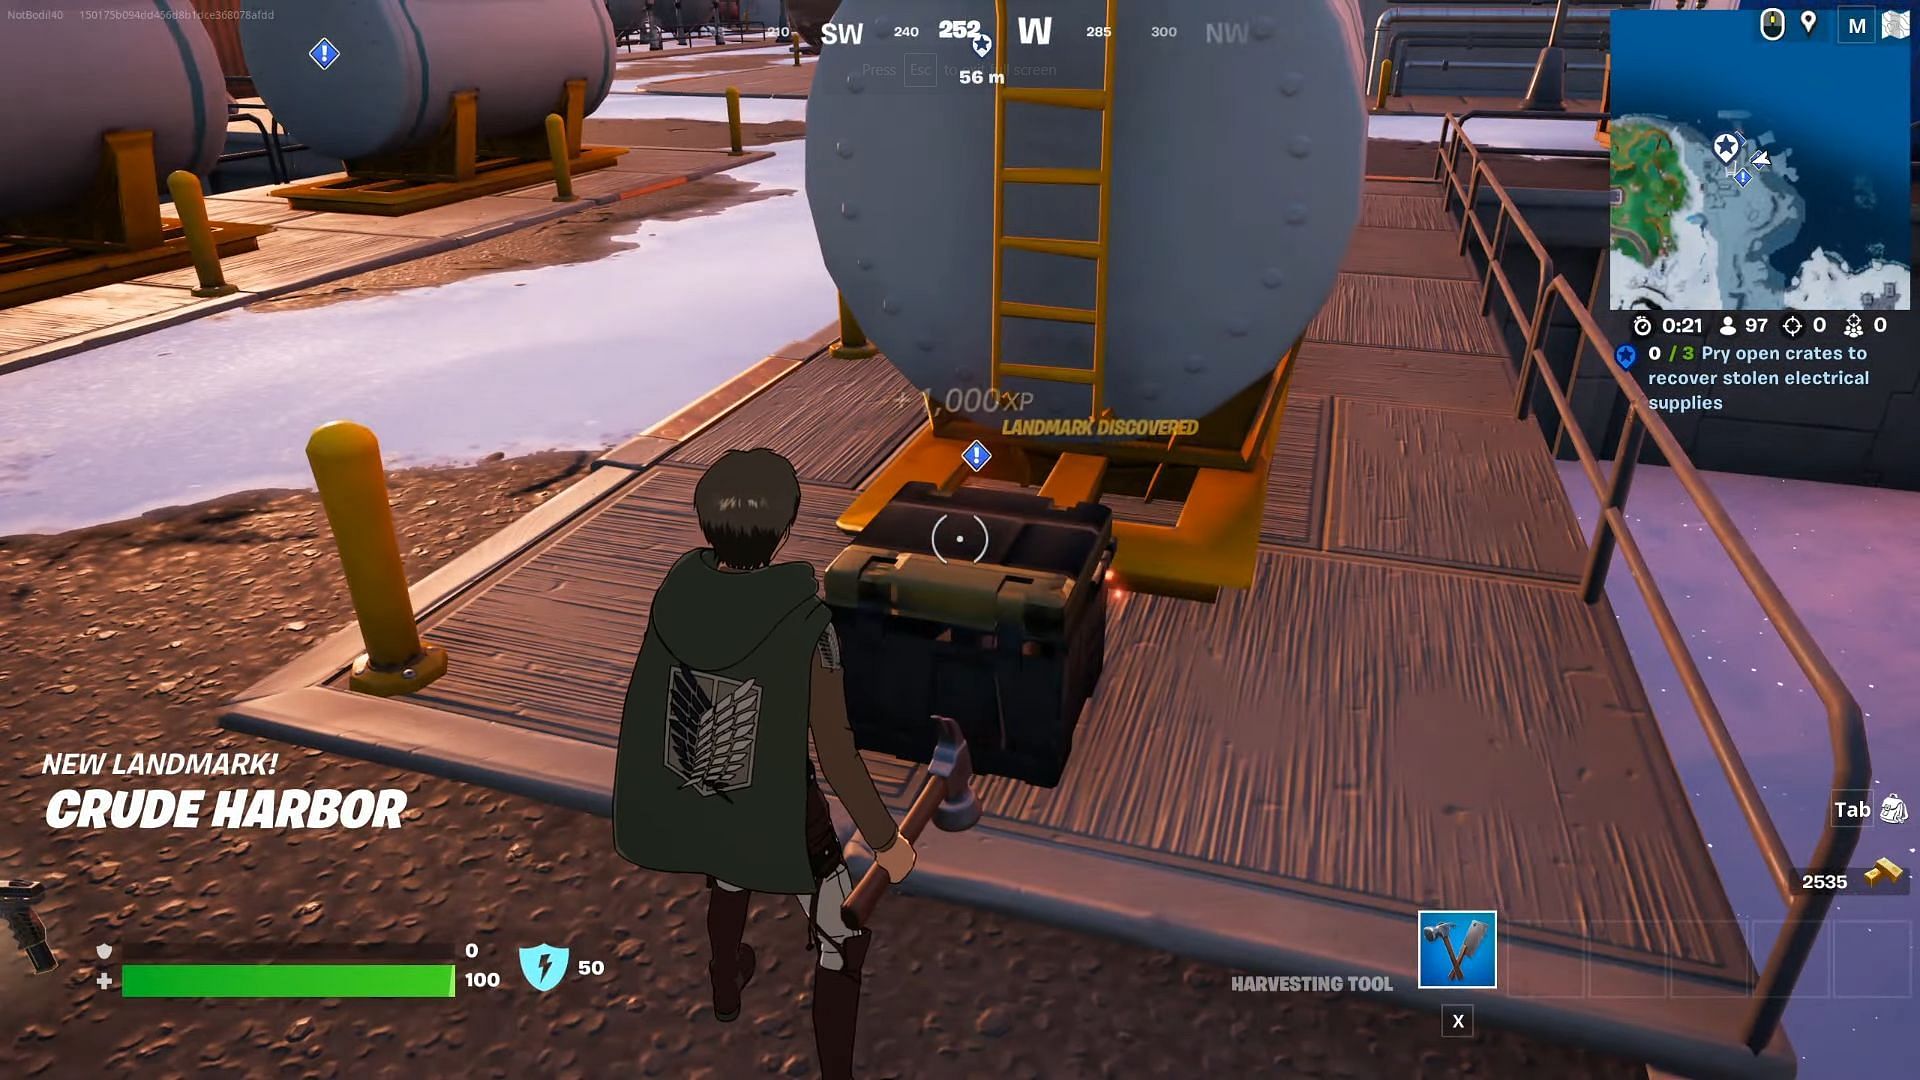 Pry open the crates using the Harvesting Tool (Image via YouTube/Bodil40)